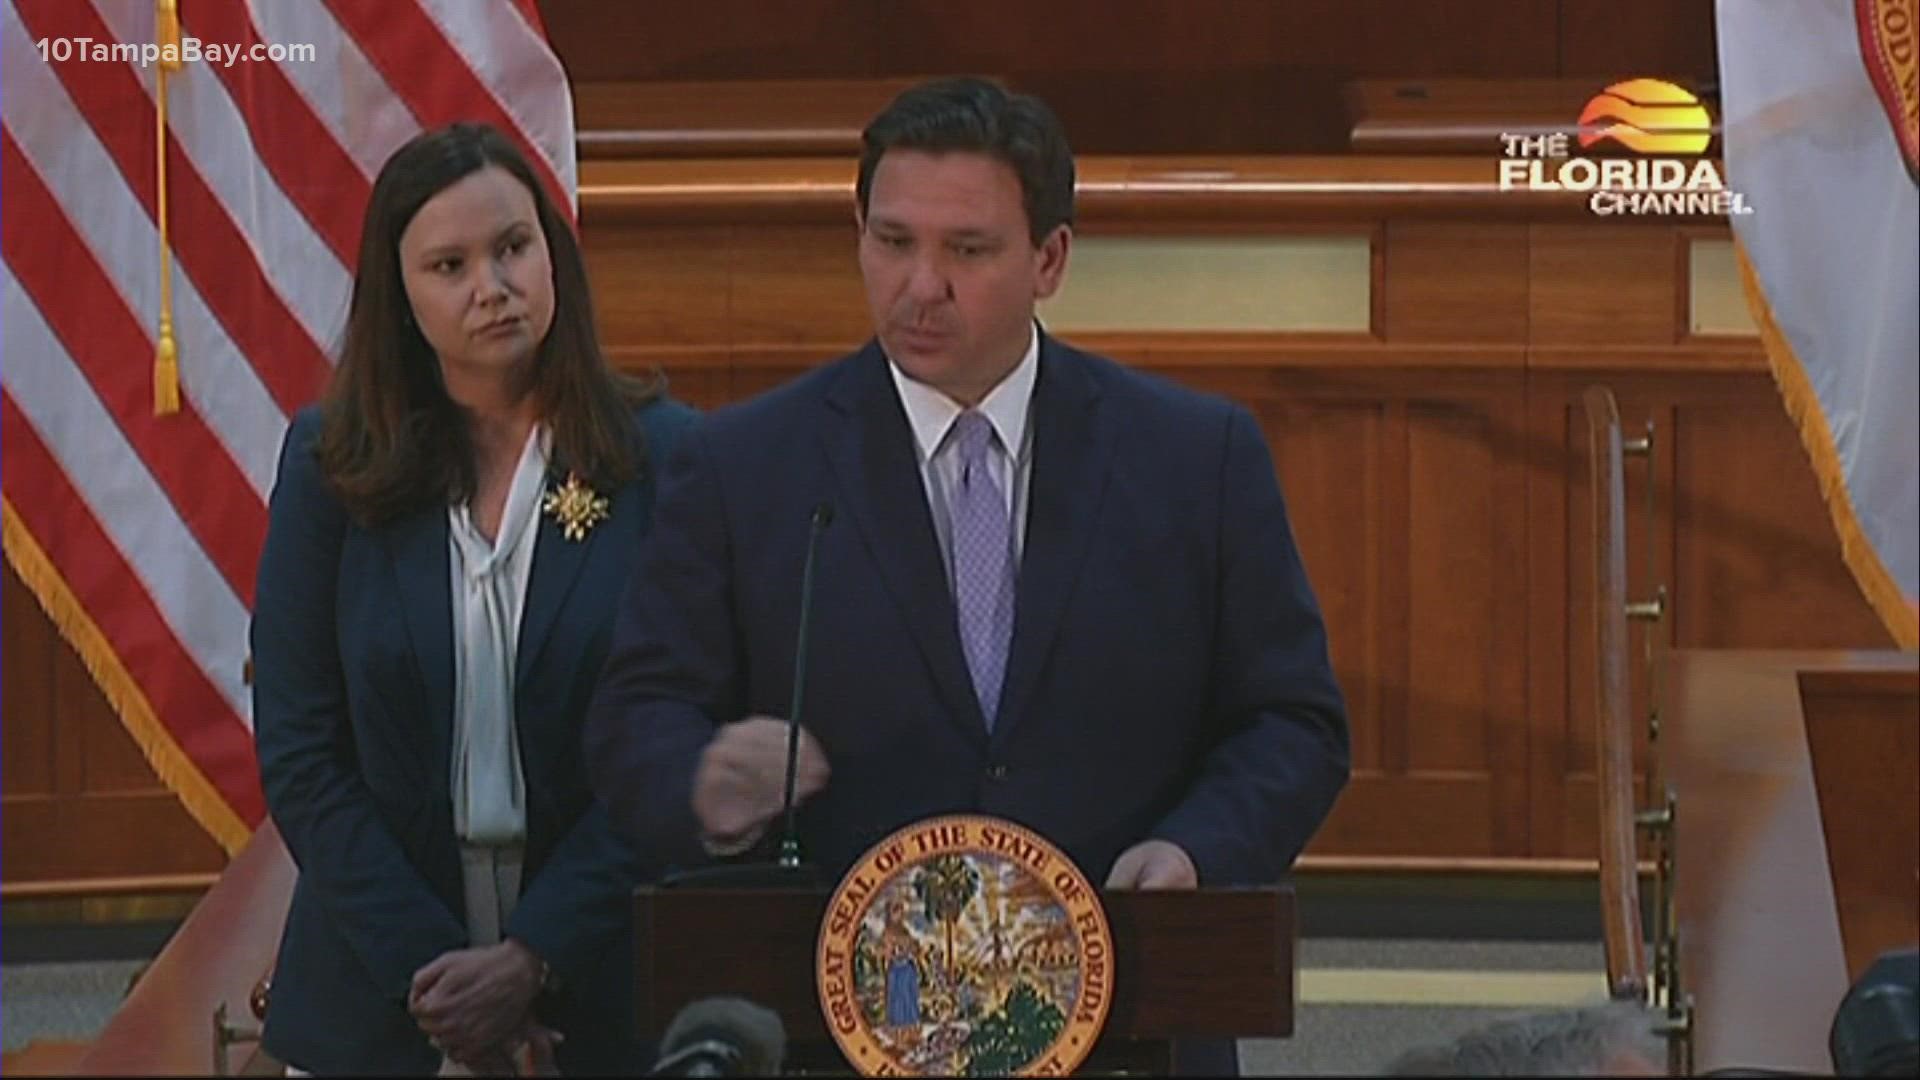 Attorney General Ashley Moody says the rule exceeds the federal government's authority.